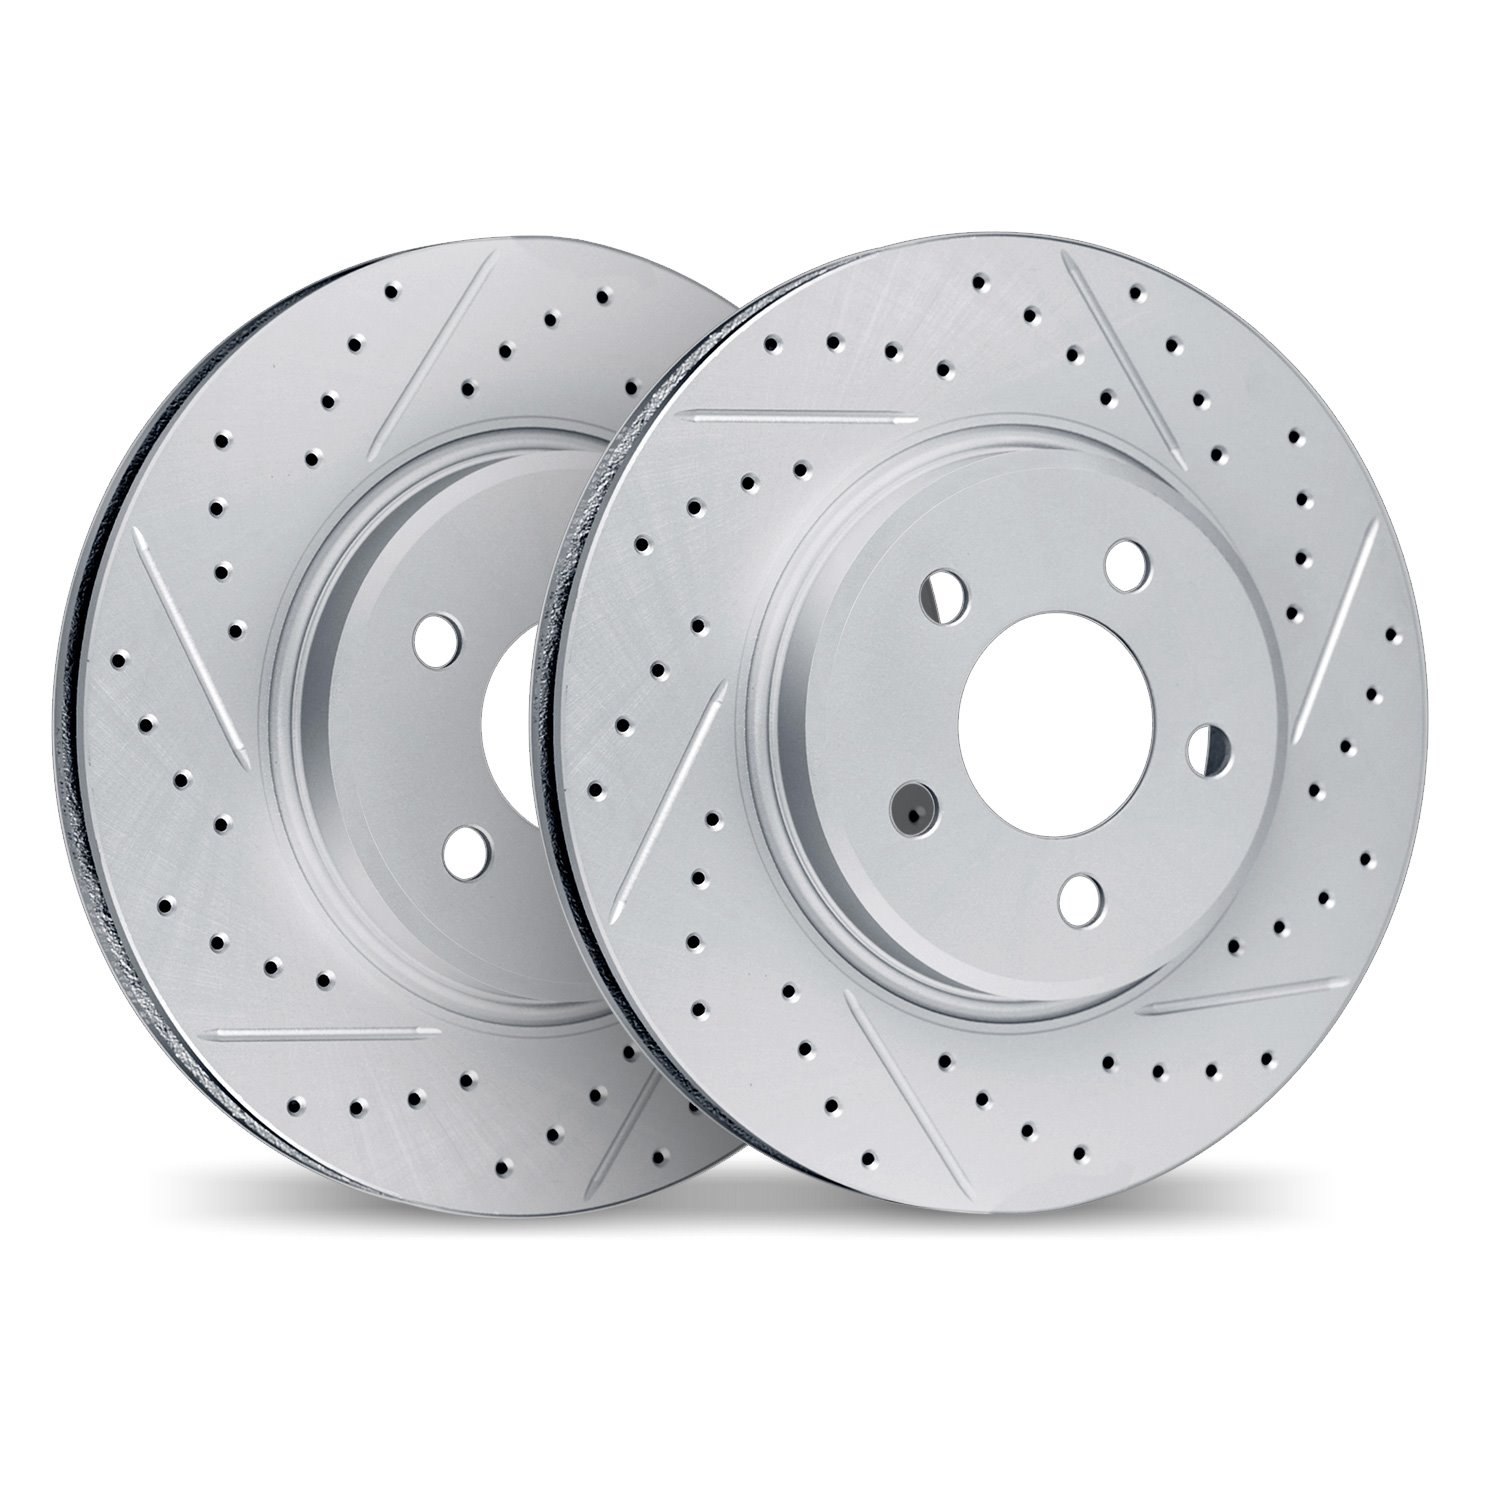 2002-55001 Geoperformance Drilled/Slotted Brake Rotors, 2003-2005 Ford/Lincoln/Mercury/Mazda, Position: Front